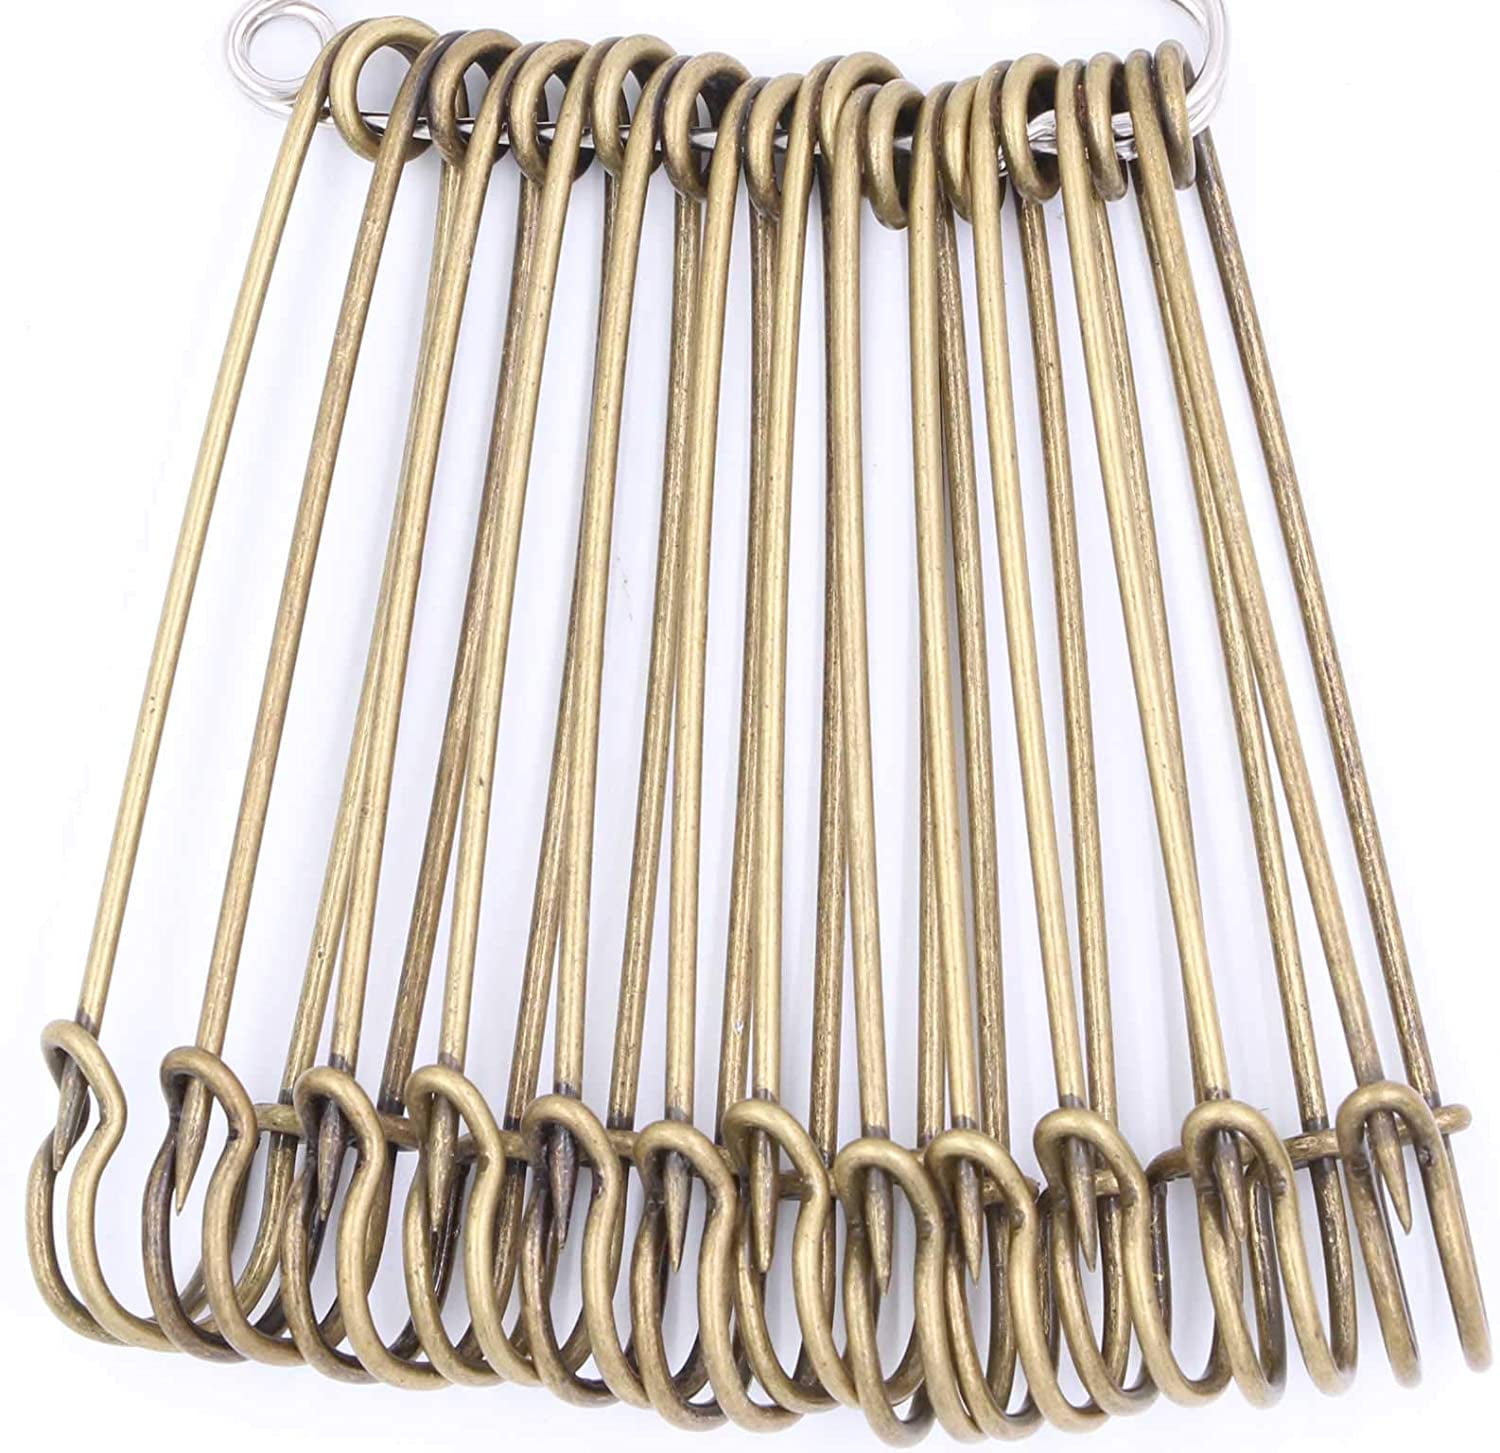 20pcs Heilwiy Large Safety Pins 4 Inch Kilt Pins Extra Large Pins